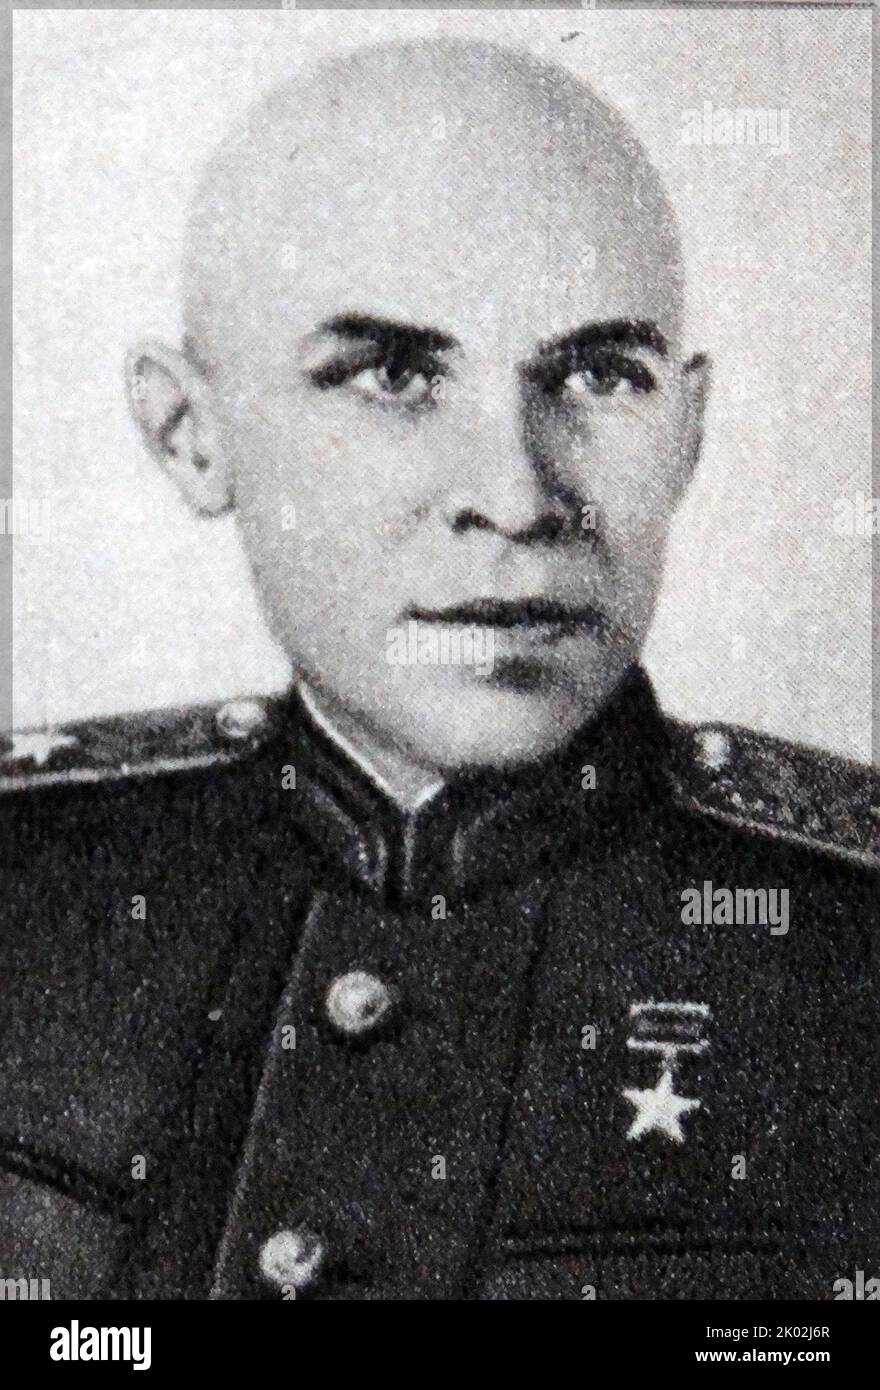 Alexander Aleksandrovich Morozov (1904 - 1979) was a Soviet designer of tanks, general, major-engineer (1945), and doctor of technical sciences (1972), twice Hero of the Socialist Labour (1942, 1974). The member of the CPSU since 1943, from 1940 he became main designer for the development of the medium T-34 tank in 1940. The T-34 was the most mass-produced tank of WWII. Stock Photo